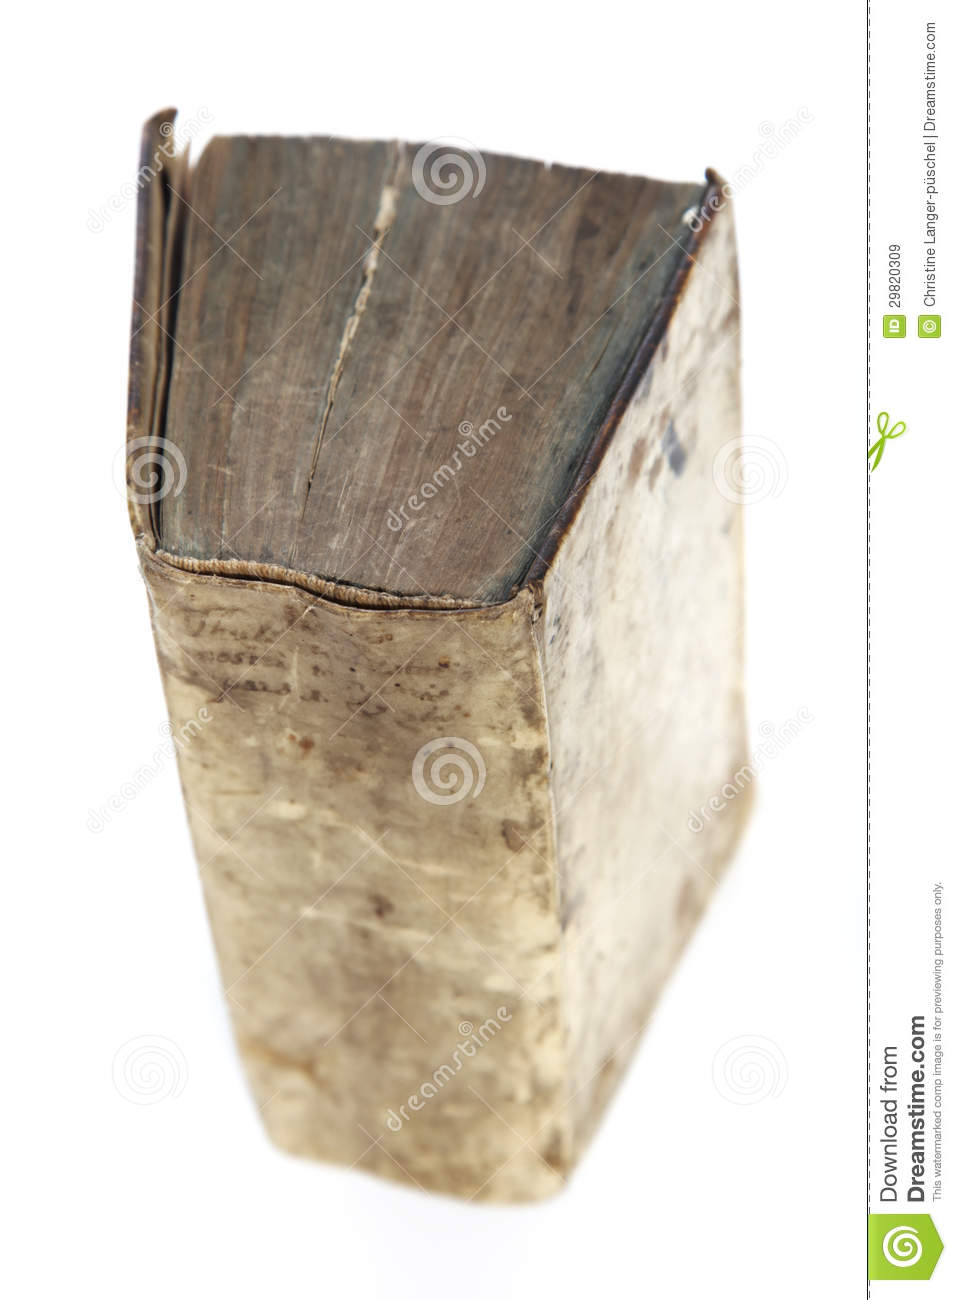 High Angle View Of An Old Worn Vintage Hardcover Book With A Stained    